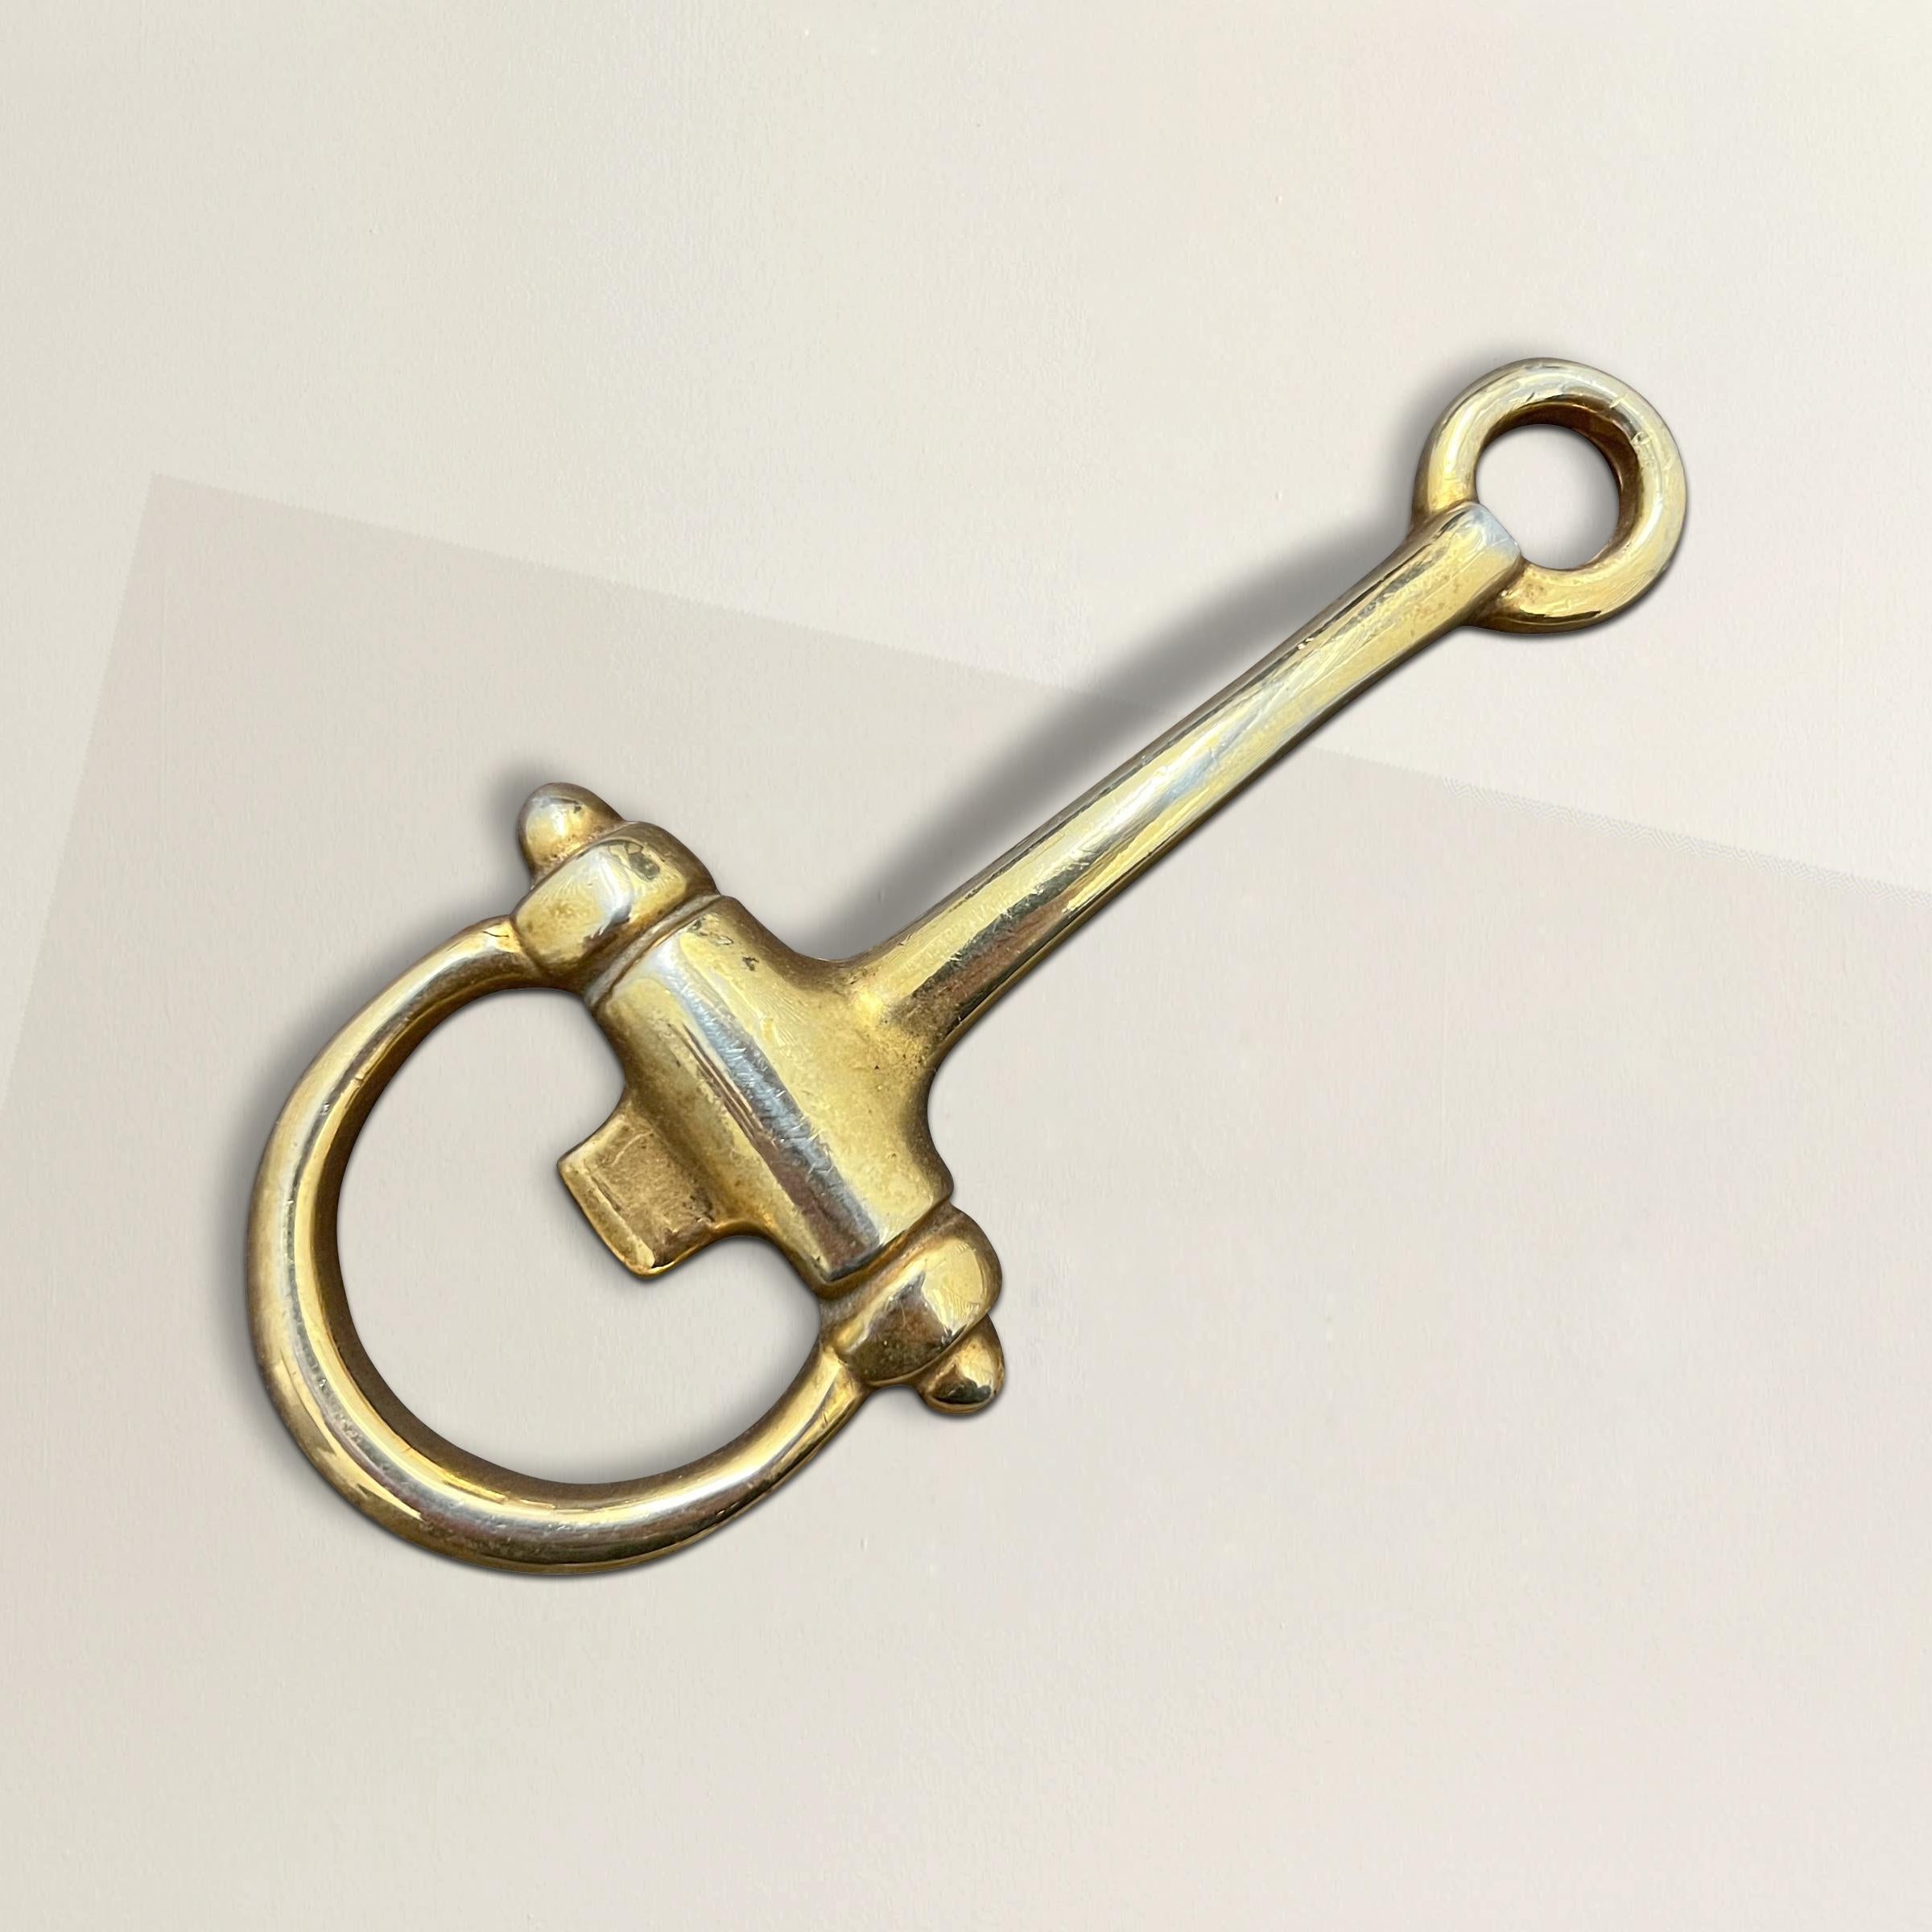 A chic Mid-20th Century Italian gold-plated horsebit bottle opener by Gucci. Purchased in Florence, Italy from a vintage fashion dealer who said this was borrowed by the Gucci Museo for an exhibition showcasing the company's housewares.